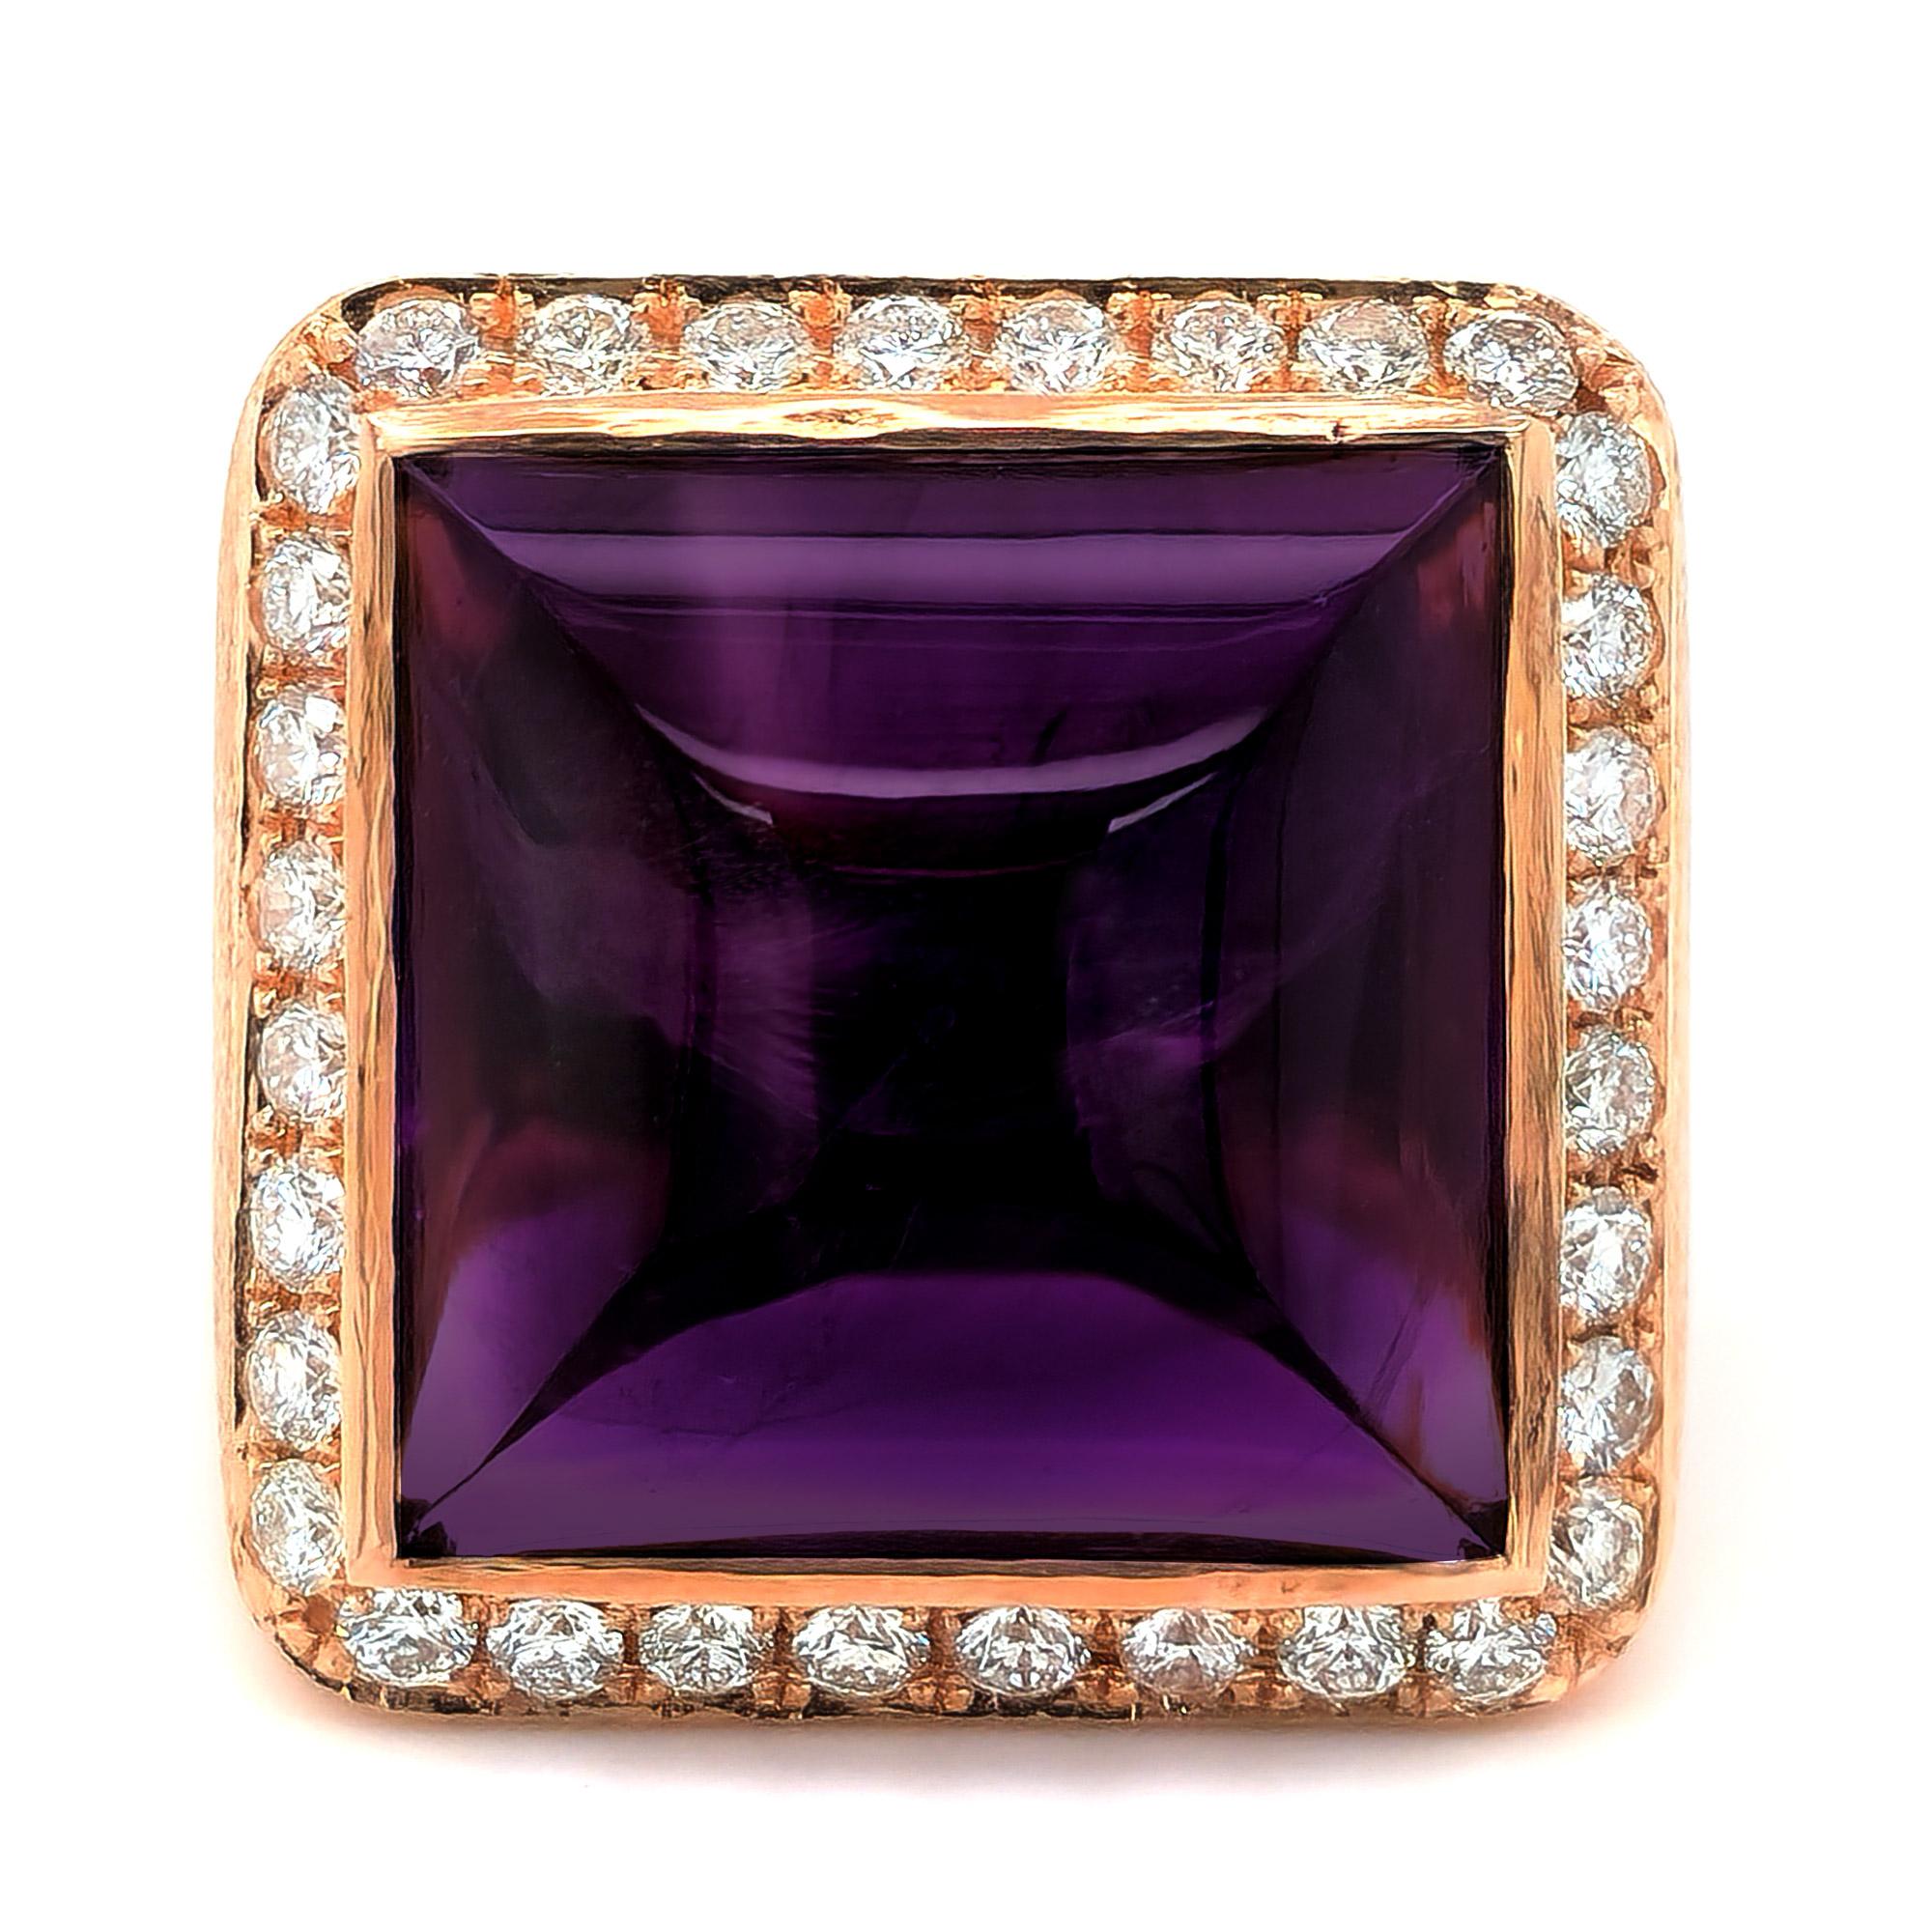 A color that has a glorious avatar, here is a 15.31 carat Sugarloaf Amethyst that comes set with diamonds around adding a little sparkle. Allowing light to create the spectacle intended, this beautiful gemstone has unmatched brilliance.

Ring